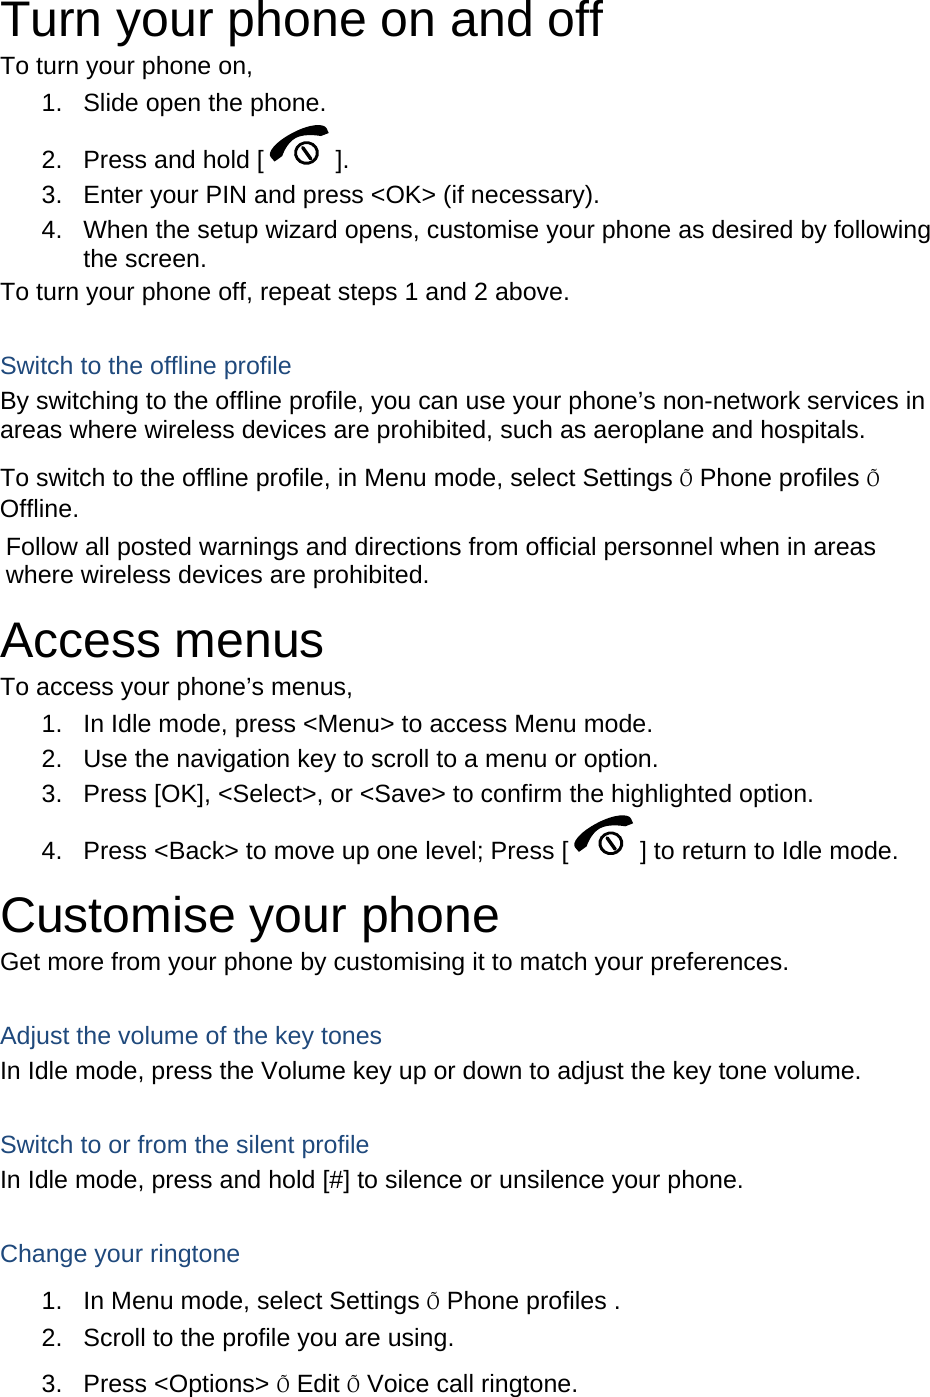 Turn your phone on and off To turn your phone on, 1.  Slide open the phone. 2.  Press and hold [ ]. 3.  Enter your PIN and press &lt;OK&gt; (if necessary). 4.  When the setup wizard opens, customise your phone as desired by following the screen. To turn your phone off, repeat steps 1 and 2 above.  Switch to the offline profile By switching to the offline profile, you can use your phone’s non-network services in areas where wireless devices are prohibited, such as aeroplane and hospitals. To switch to the offline profile, in Menu mode, select Settings Õ Phone profiles Õ Offline. Follow all posted warnings and directions from official personnel when in areas where wireless devices are prohibited. Access menus To access your phone’s menus, 1.  In Idle mode, press &lt;Menu&gt; to access Menu mode. 2.  Use the navigation key to scroll to a menu or option. 3.  Press [OK], &lt;Select&gt;, or &lt;Save&gt; to confirm the highlighted option. 4.  Press &lt;Back&gt; to move up one level; Press [ ] to return to Idle mode. Customise your phone Get more from your phone by customising it to match your preferences.  Adjust the volume of the key tones In Idle mode, press the Volume key up or down to adjust the key tone volume.  Switch to or from the silent profile In Idle mode, press and hold [#] to silence or unsilence your phone.  Change your ringtone 1.  In Menu mode, select Settings Õ Phone profiles . 2.  Scroll to the profile you are using. 3. Press &lt;Options&gt; Õ Edit Õ Voice call ringtone. 